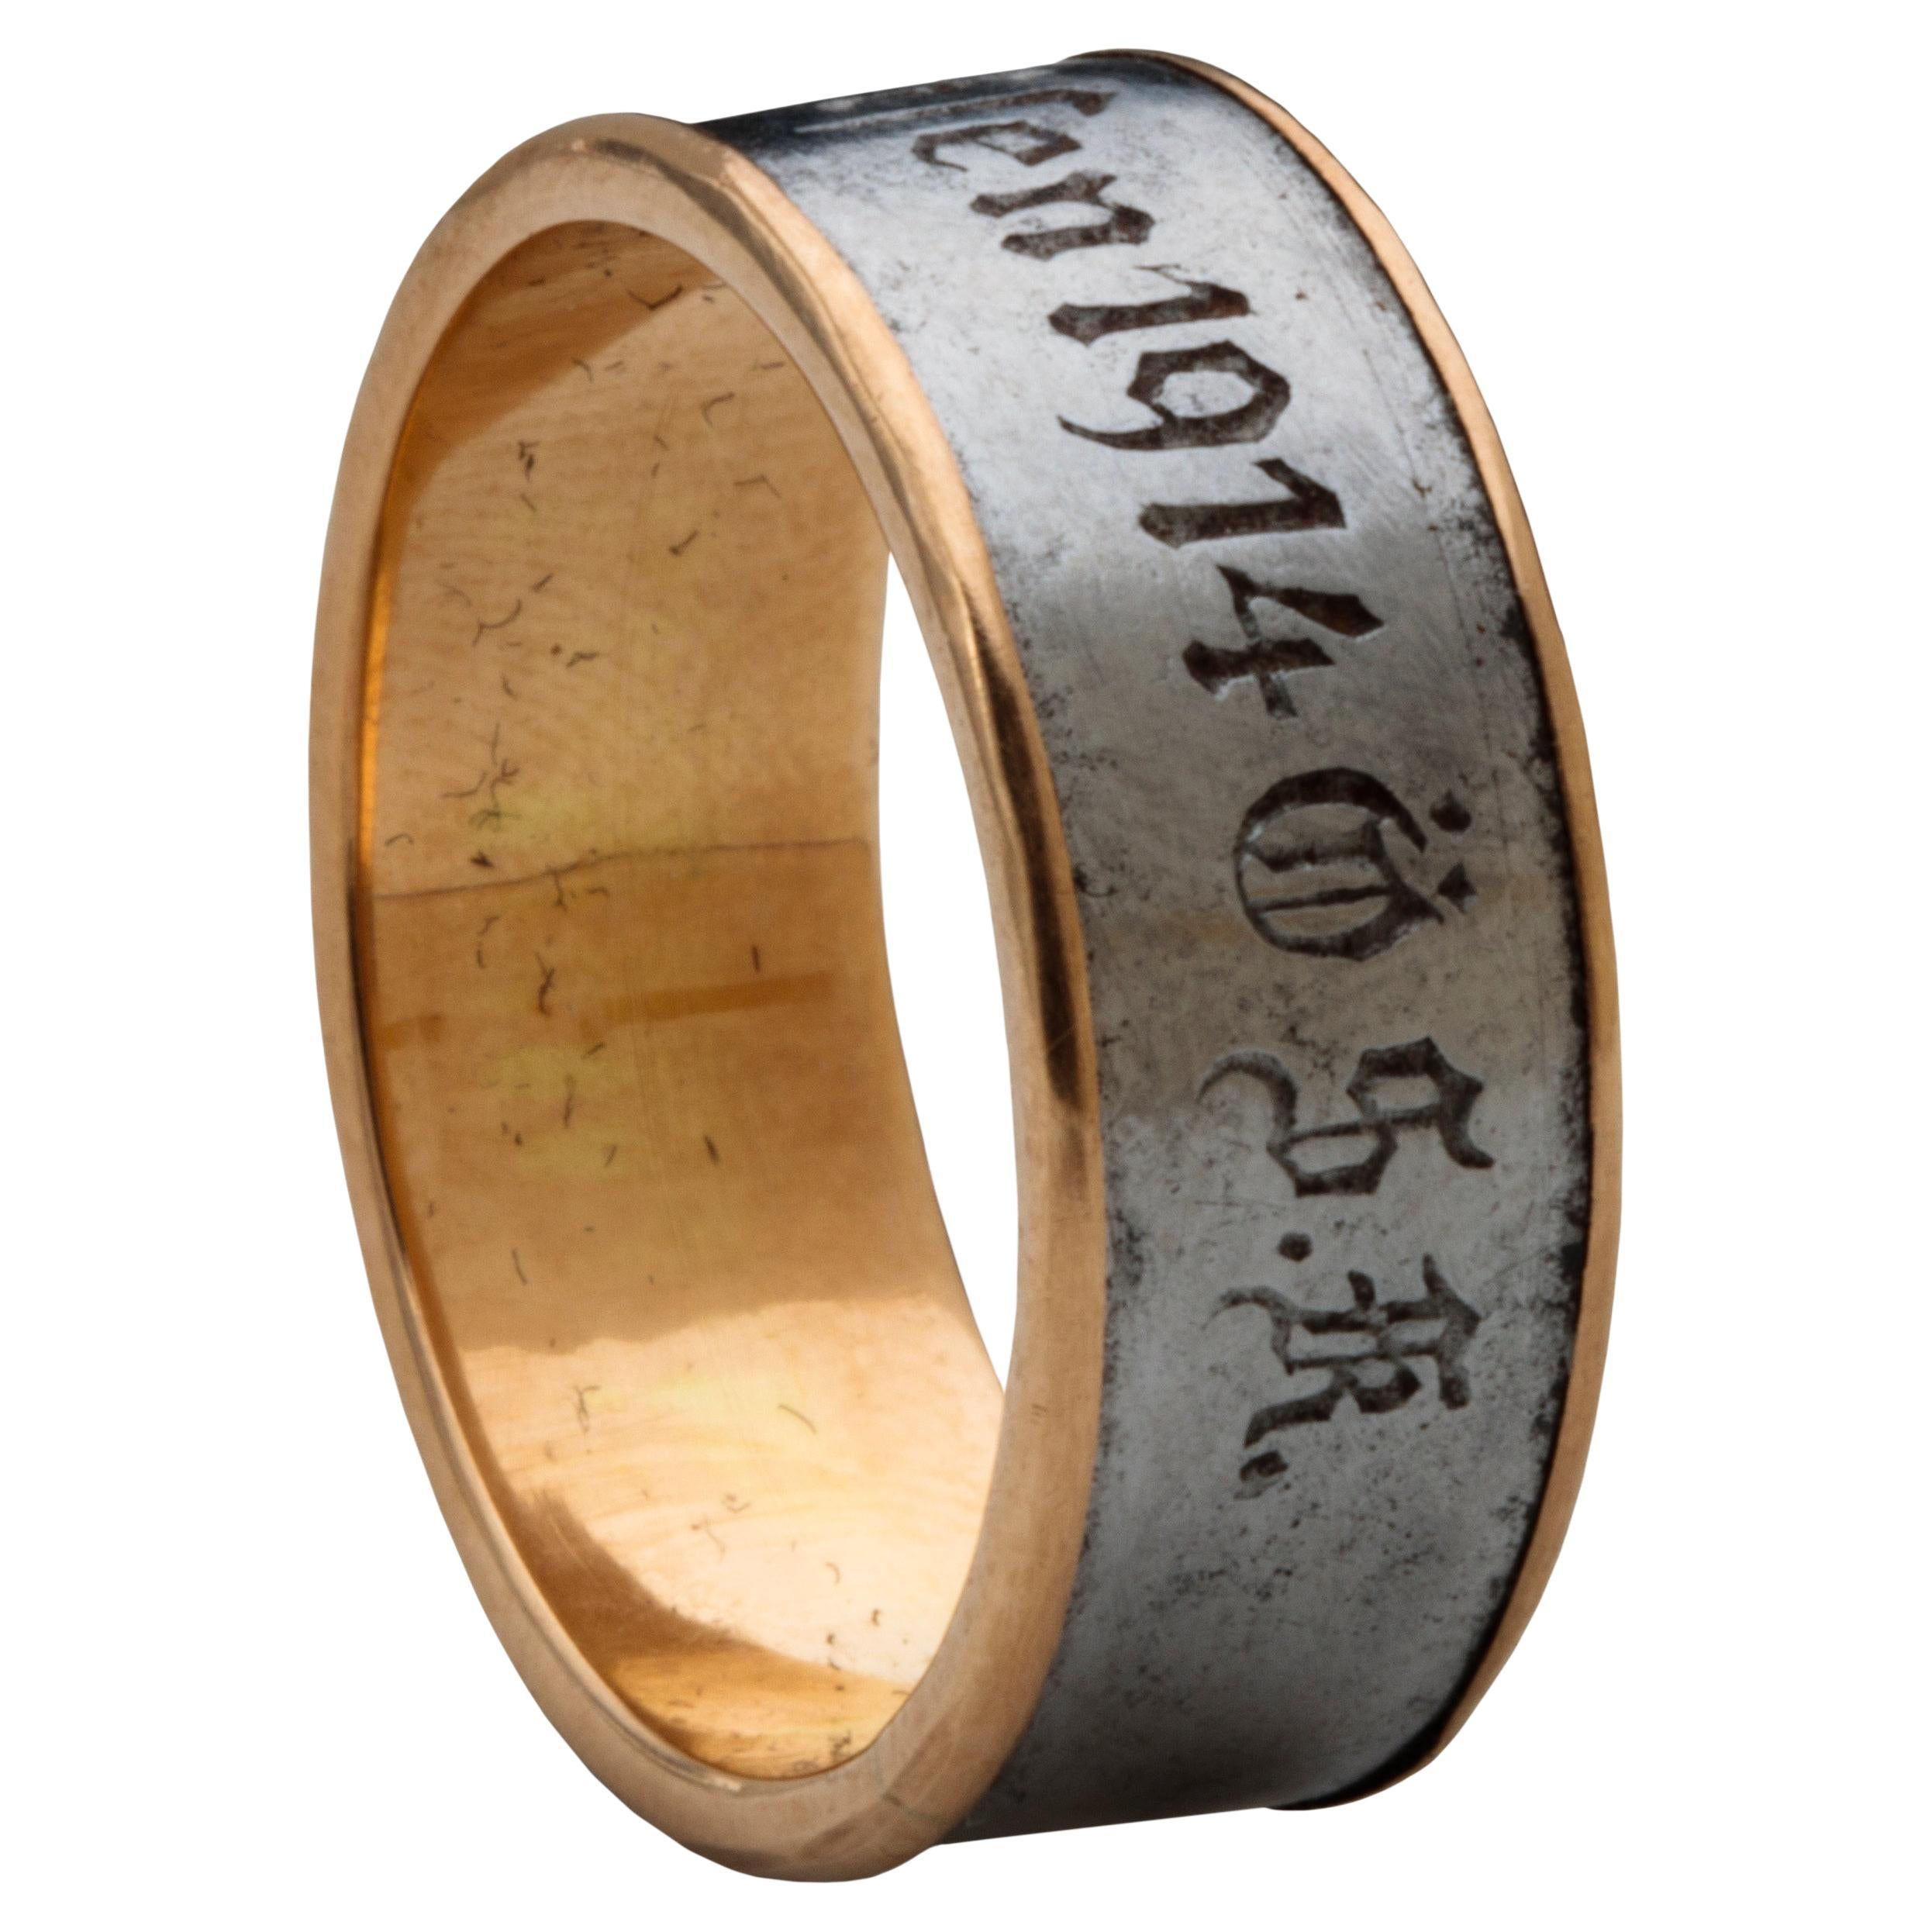 Inscribed Patriotic Ring from the First World War